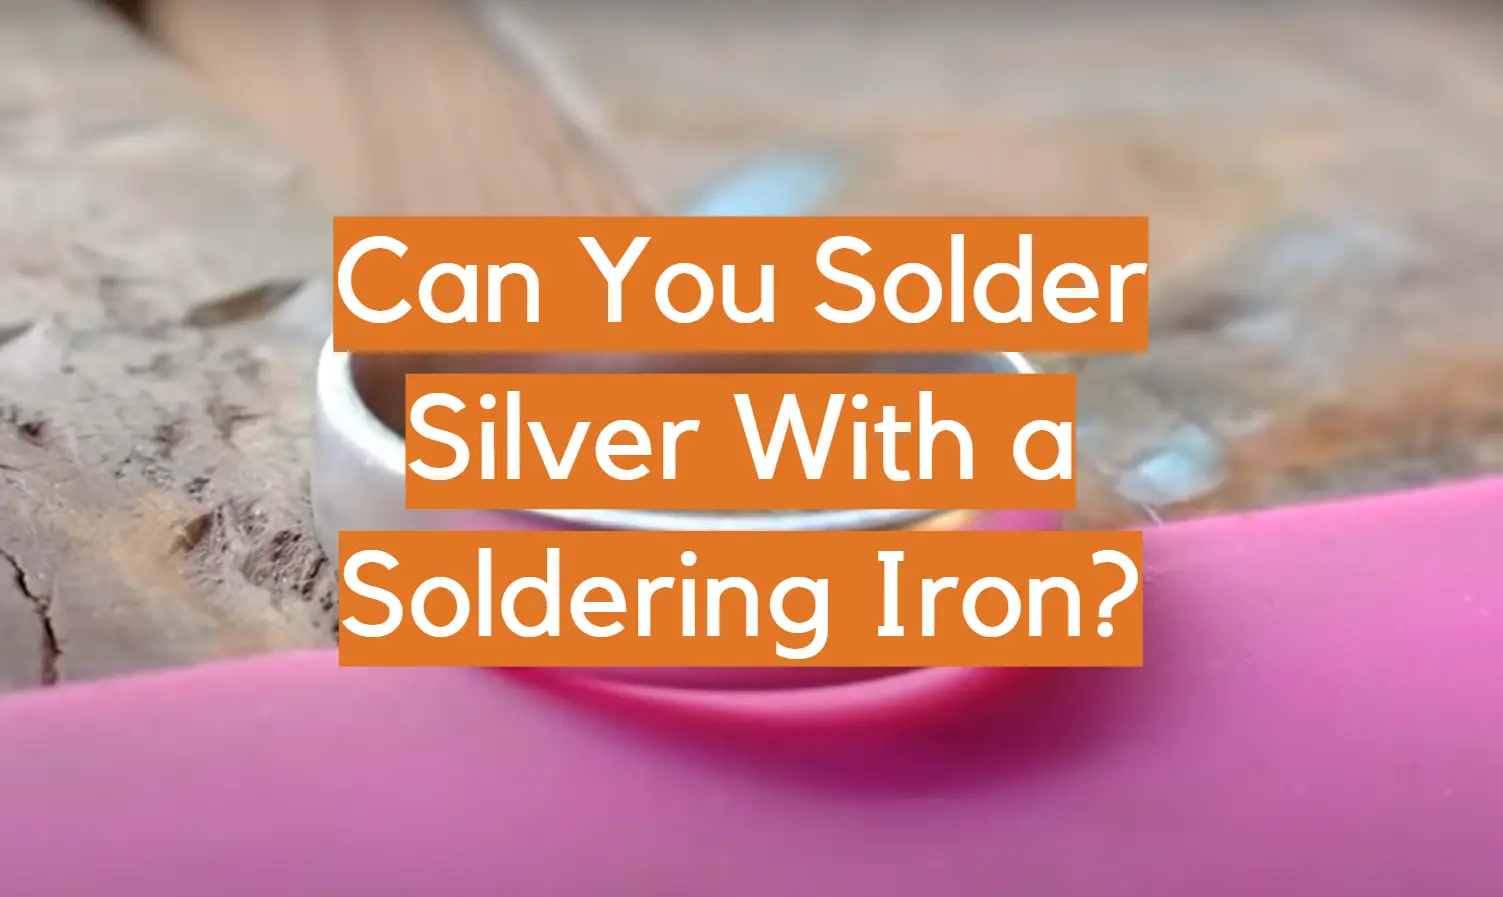 Can You Solder Silver With a Soldering Iron?